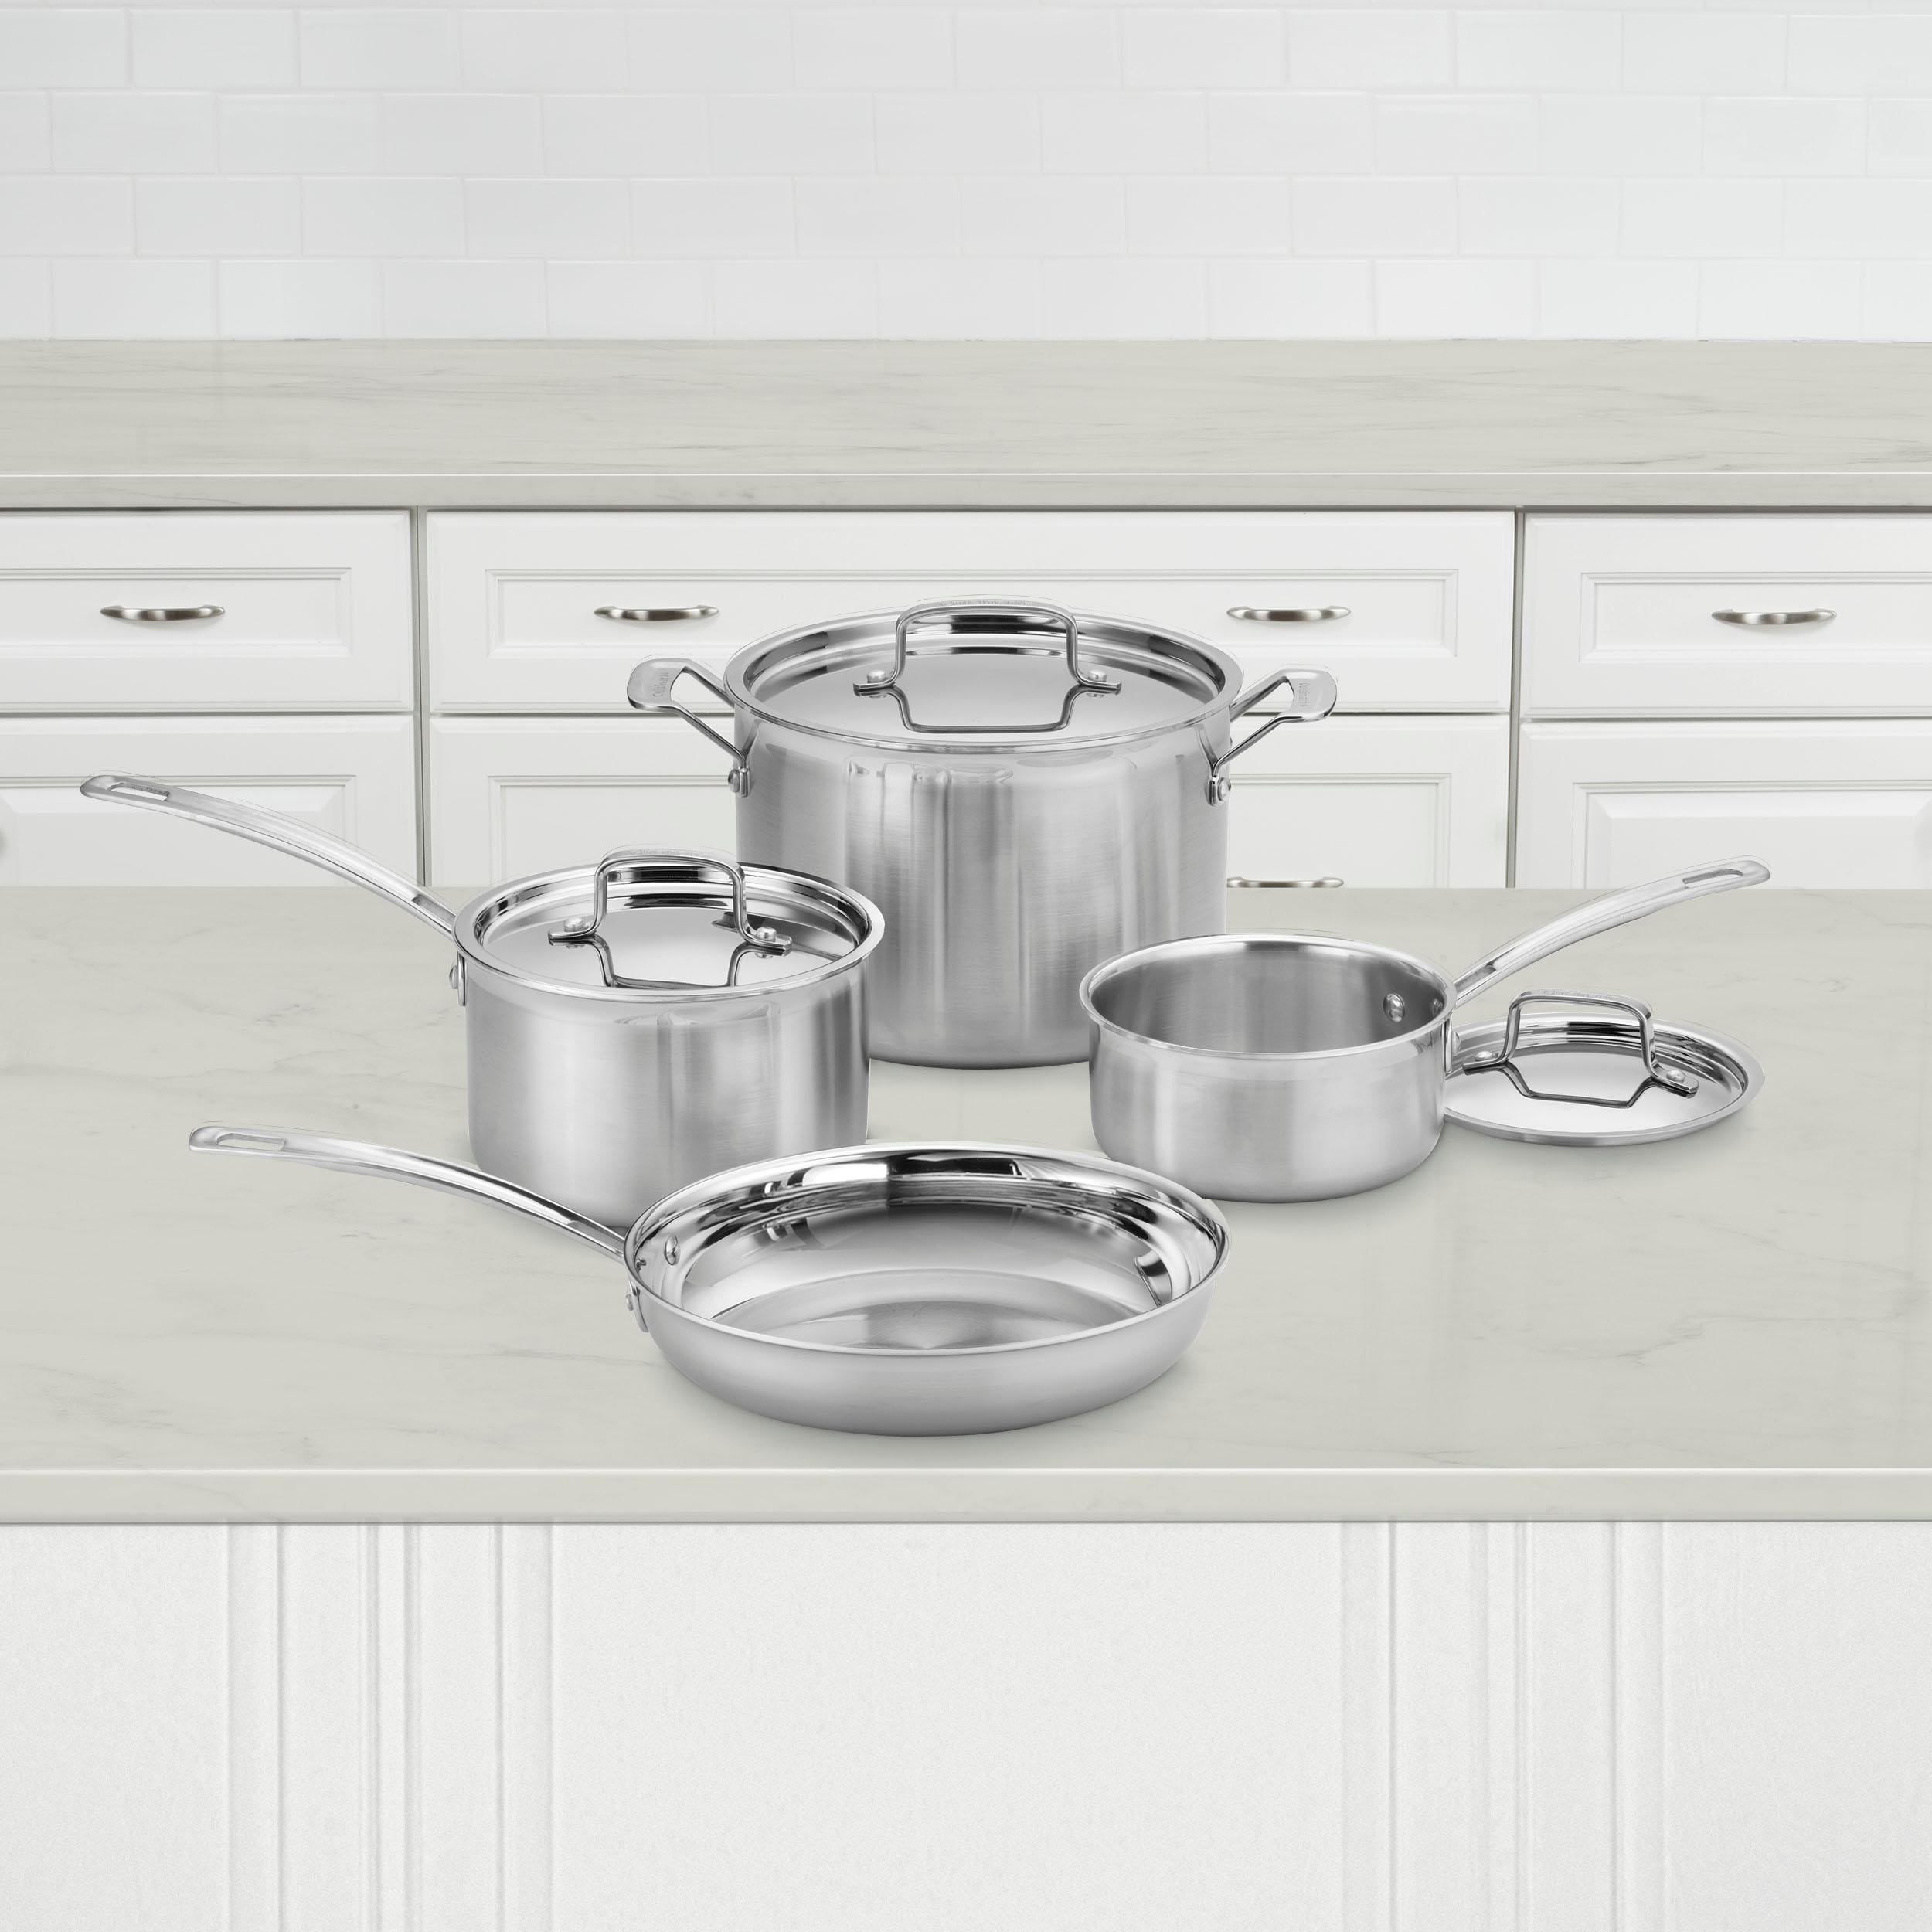 https://ak1.ostkcdn.com/images/products/is/images/direct/2e4e2d630998b33c3bd07407e3c8f2d6f15389a2/Cuisinart-MultiClad-Pro-Triple-Ply-Stainless-Cookware-7-Piece-Set.jpg